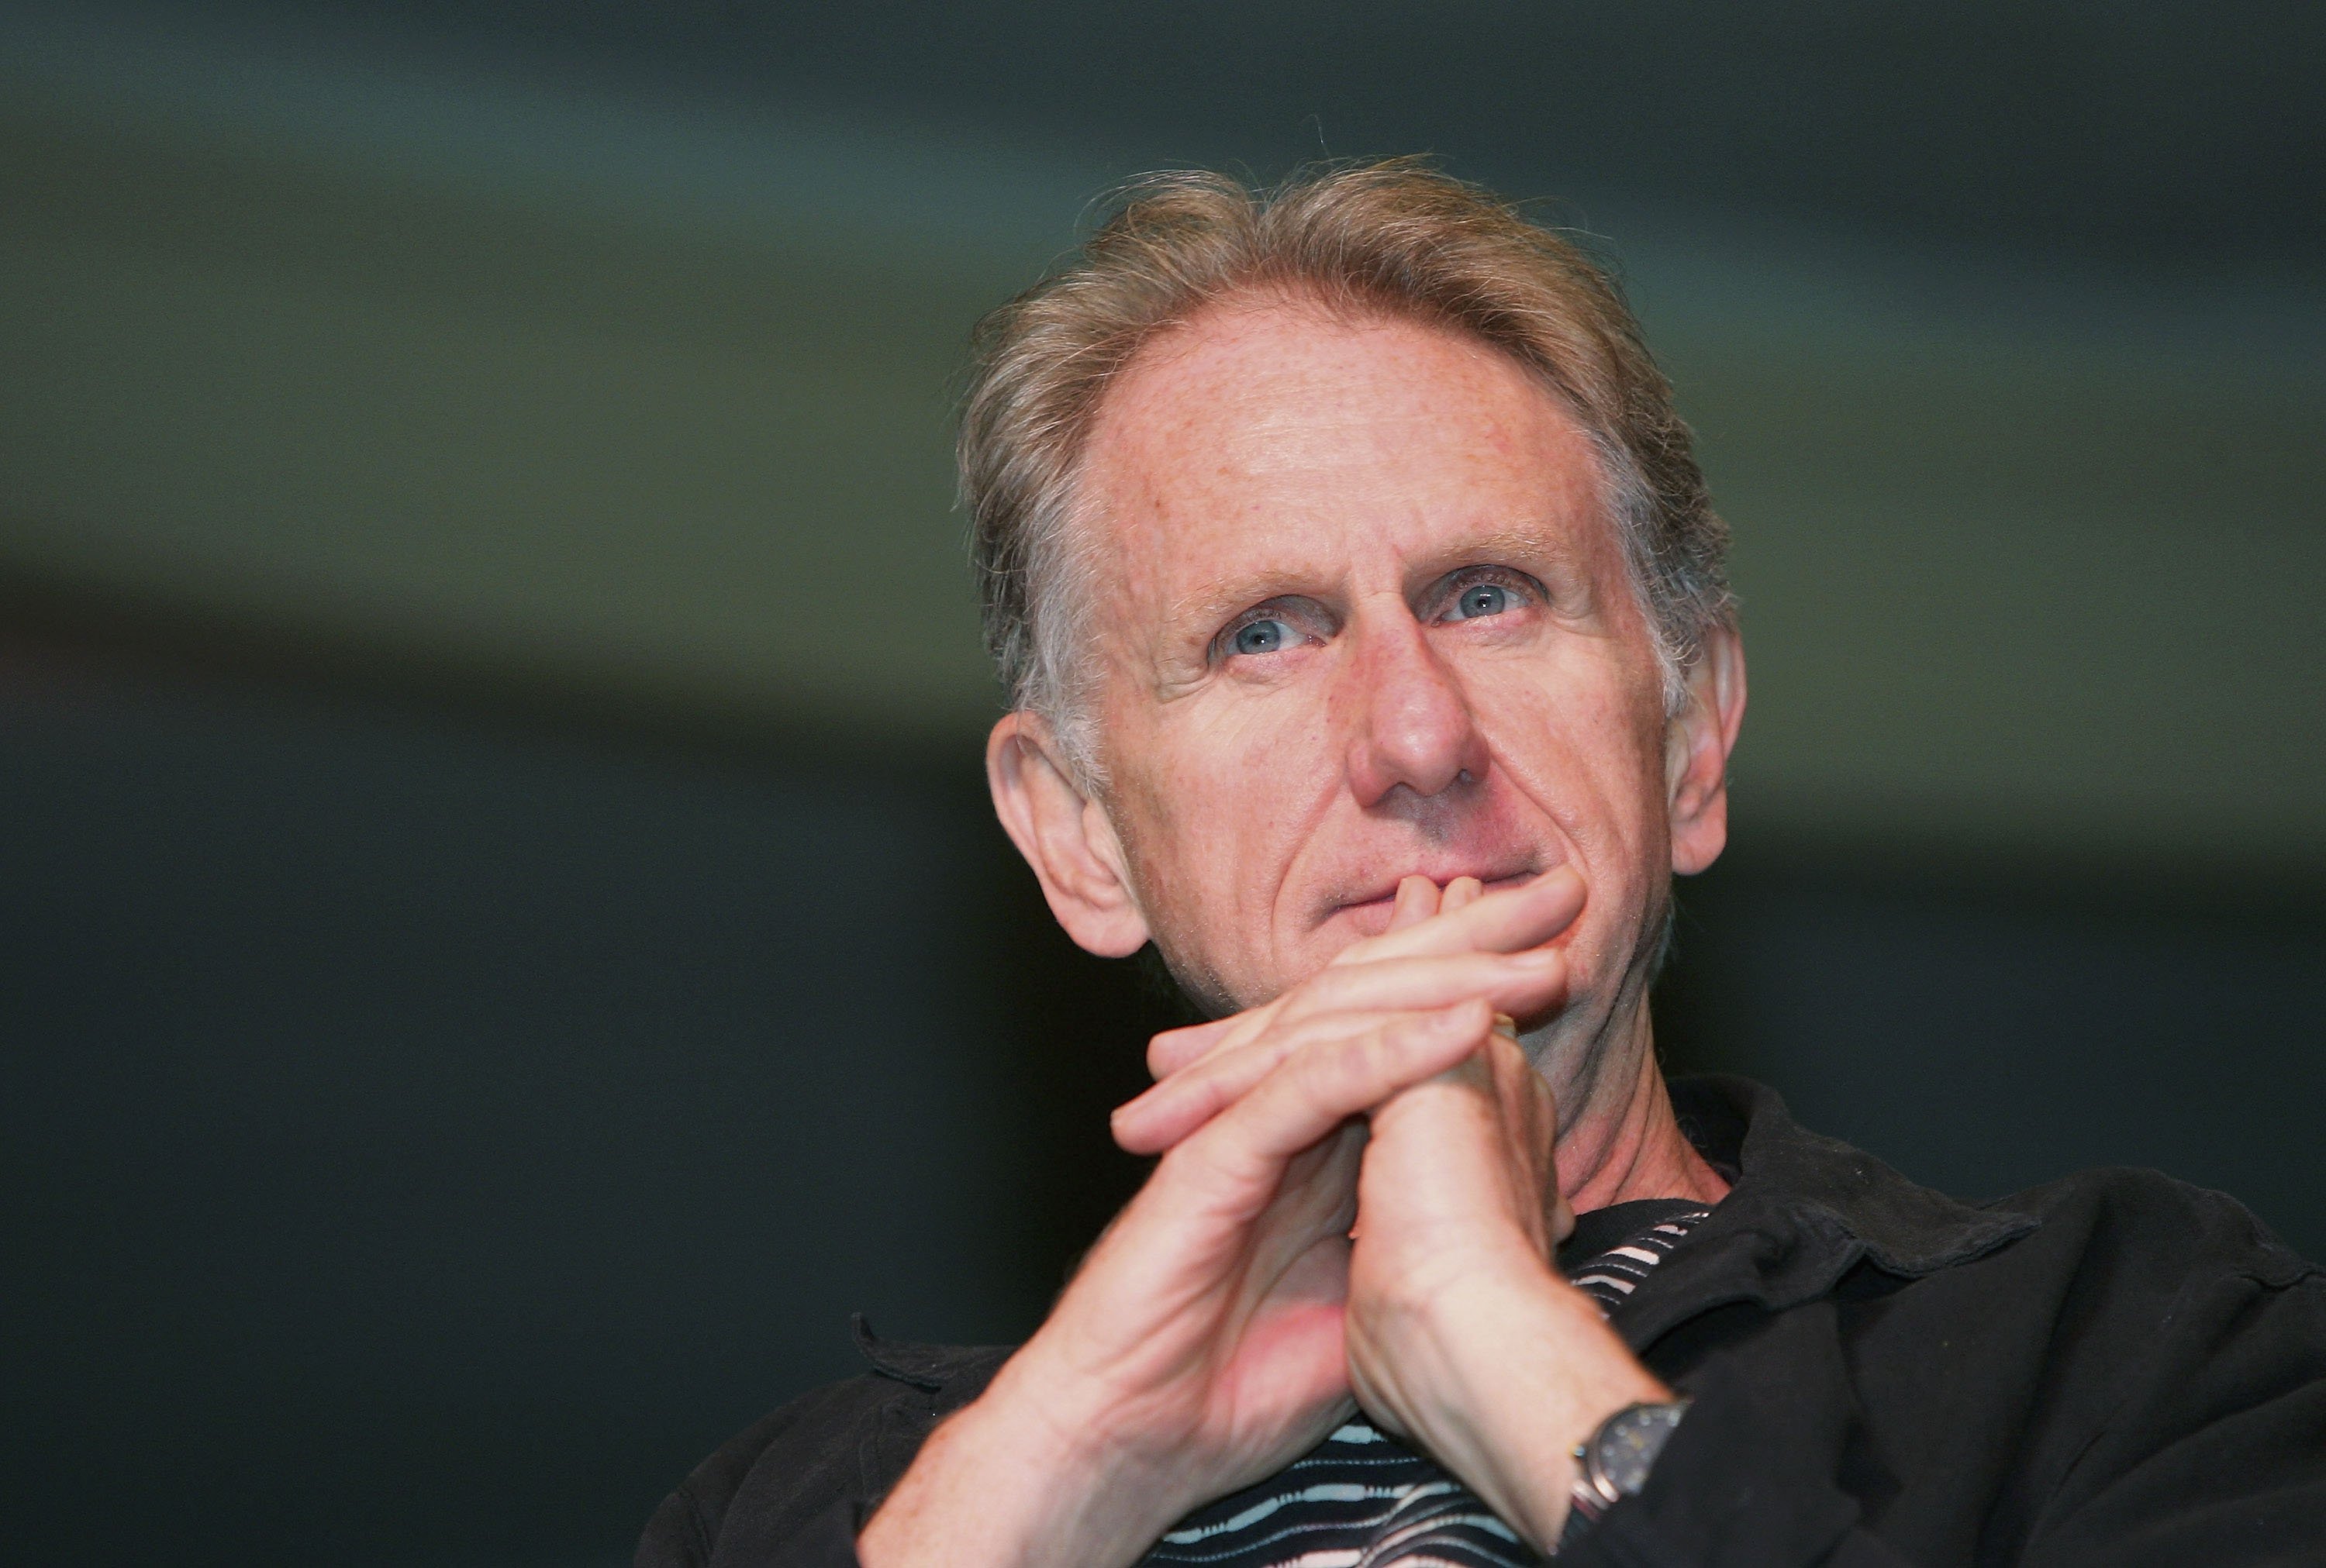 Rene Auberjonois at the "Star Trek" convention on August 14, 2005 in Las Vegas, Nevada | Photo: Getty Images